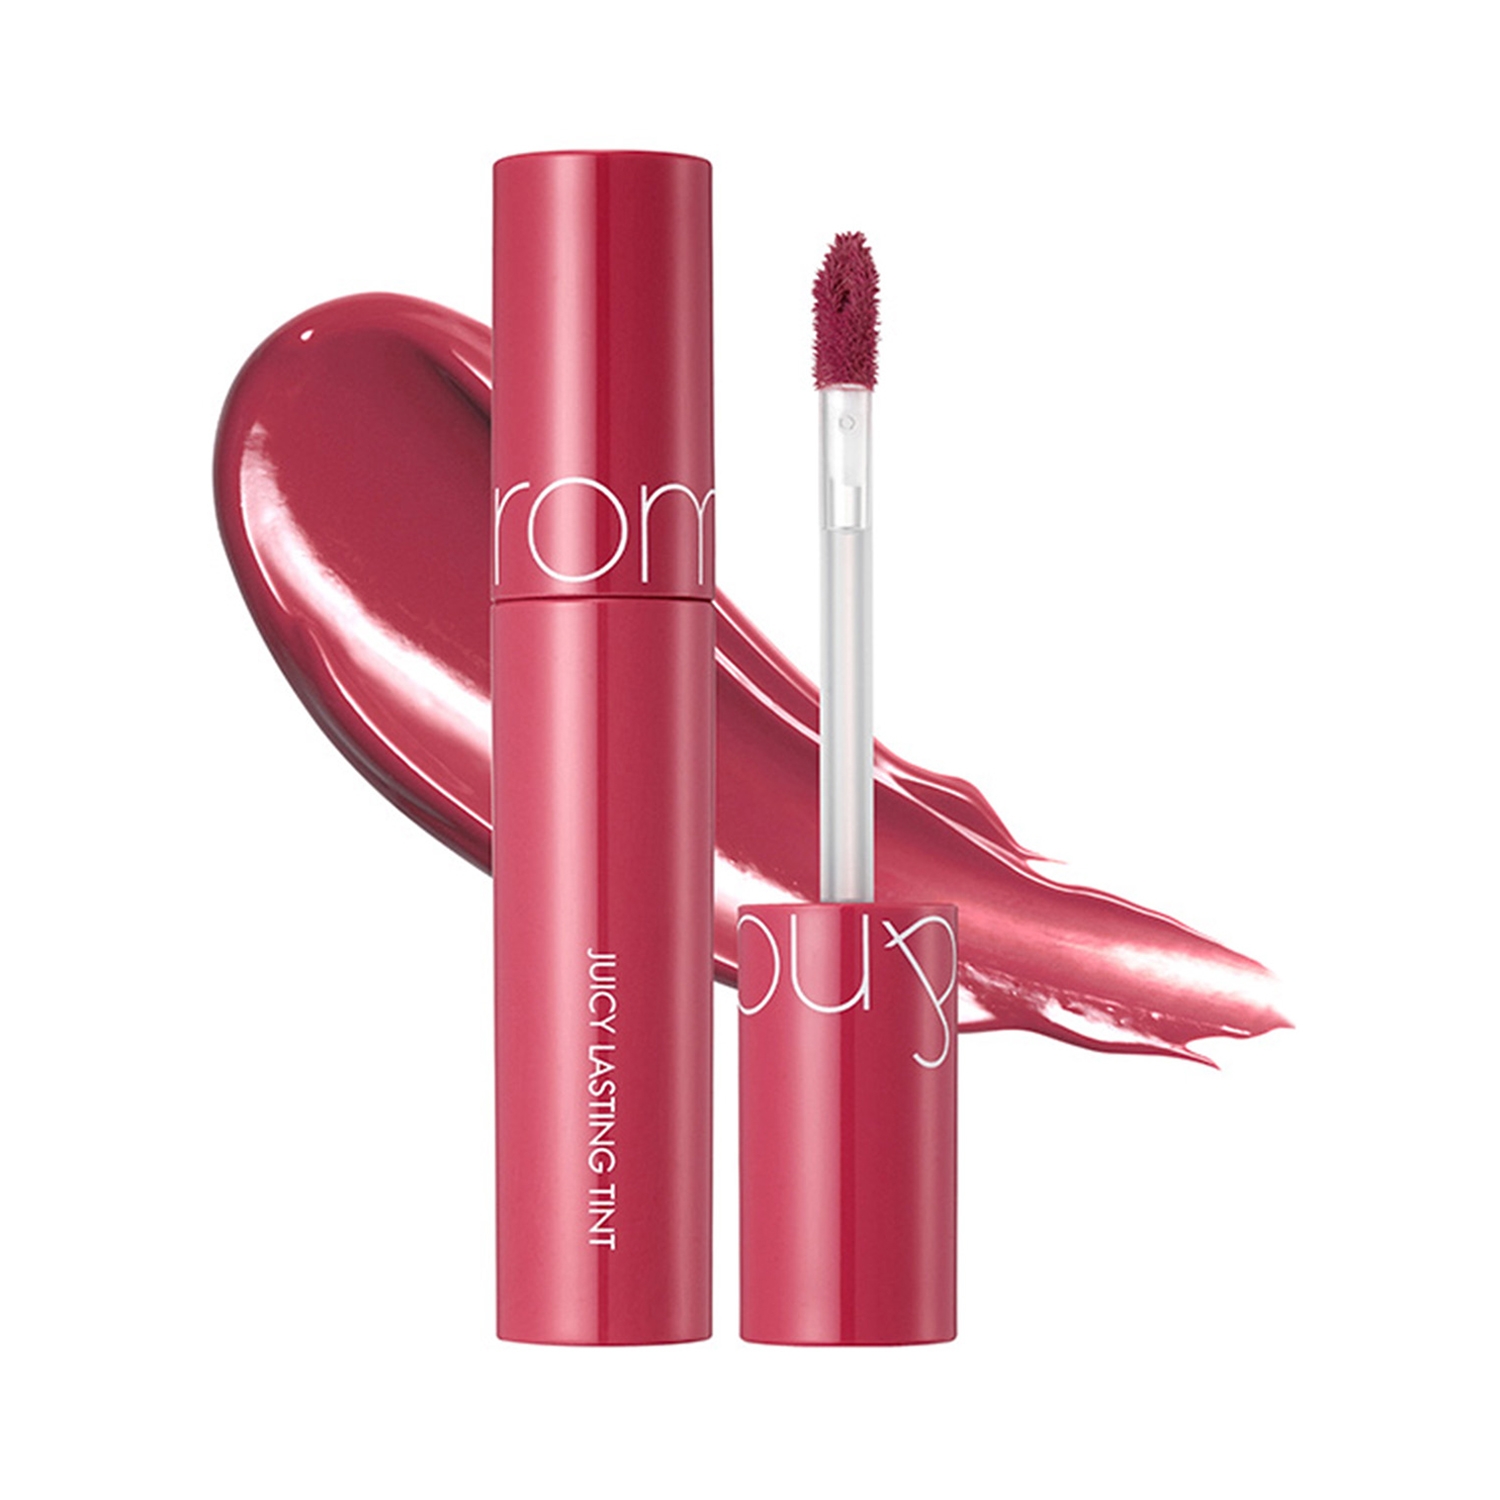 Rom&nd | Rom&nd Juicy Lasting Tint - 06 Figfig (5.5g)